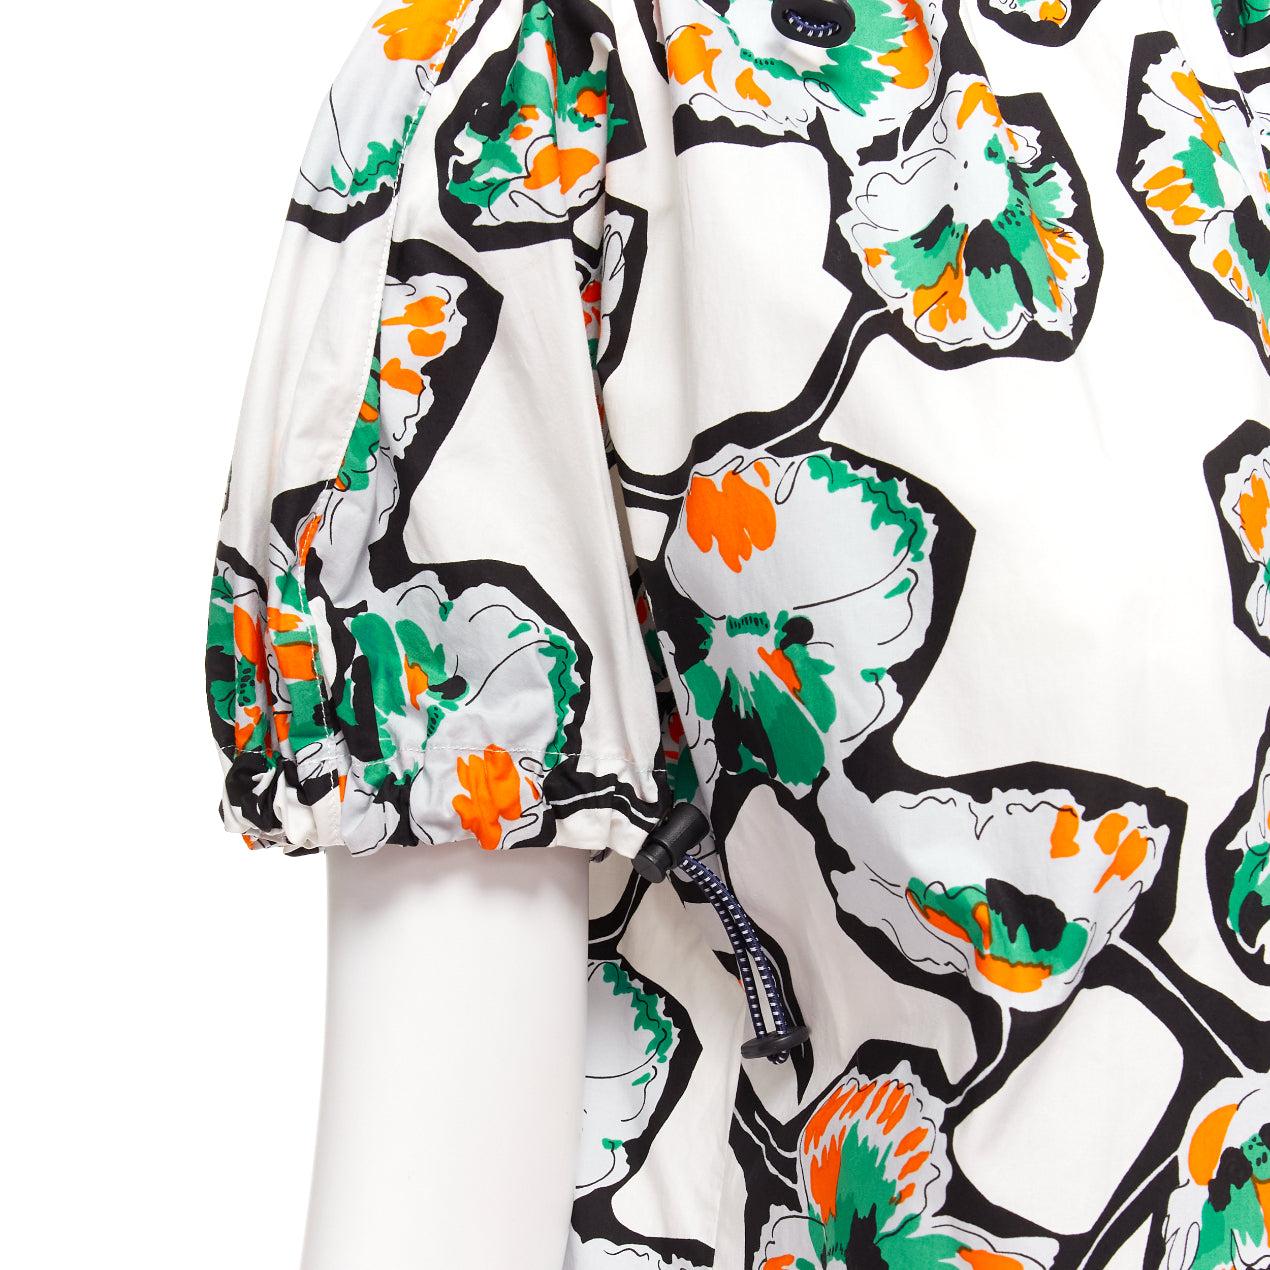 MARNI green orange floral print drawstring loop toggle shirt IT40 S
Reference: CELG/A00321
Brand: Marni
Material: Cotton
Color: Multicolour
Pattern: Floral
Closure: Drawstring
Extra Details: Cord loop drawstring detail collar and cuffs.
Made in: